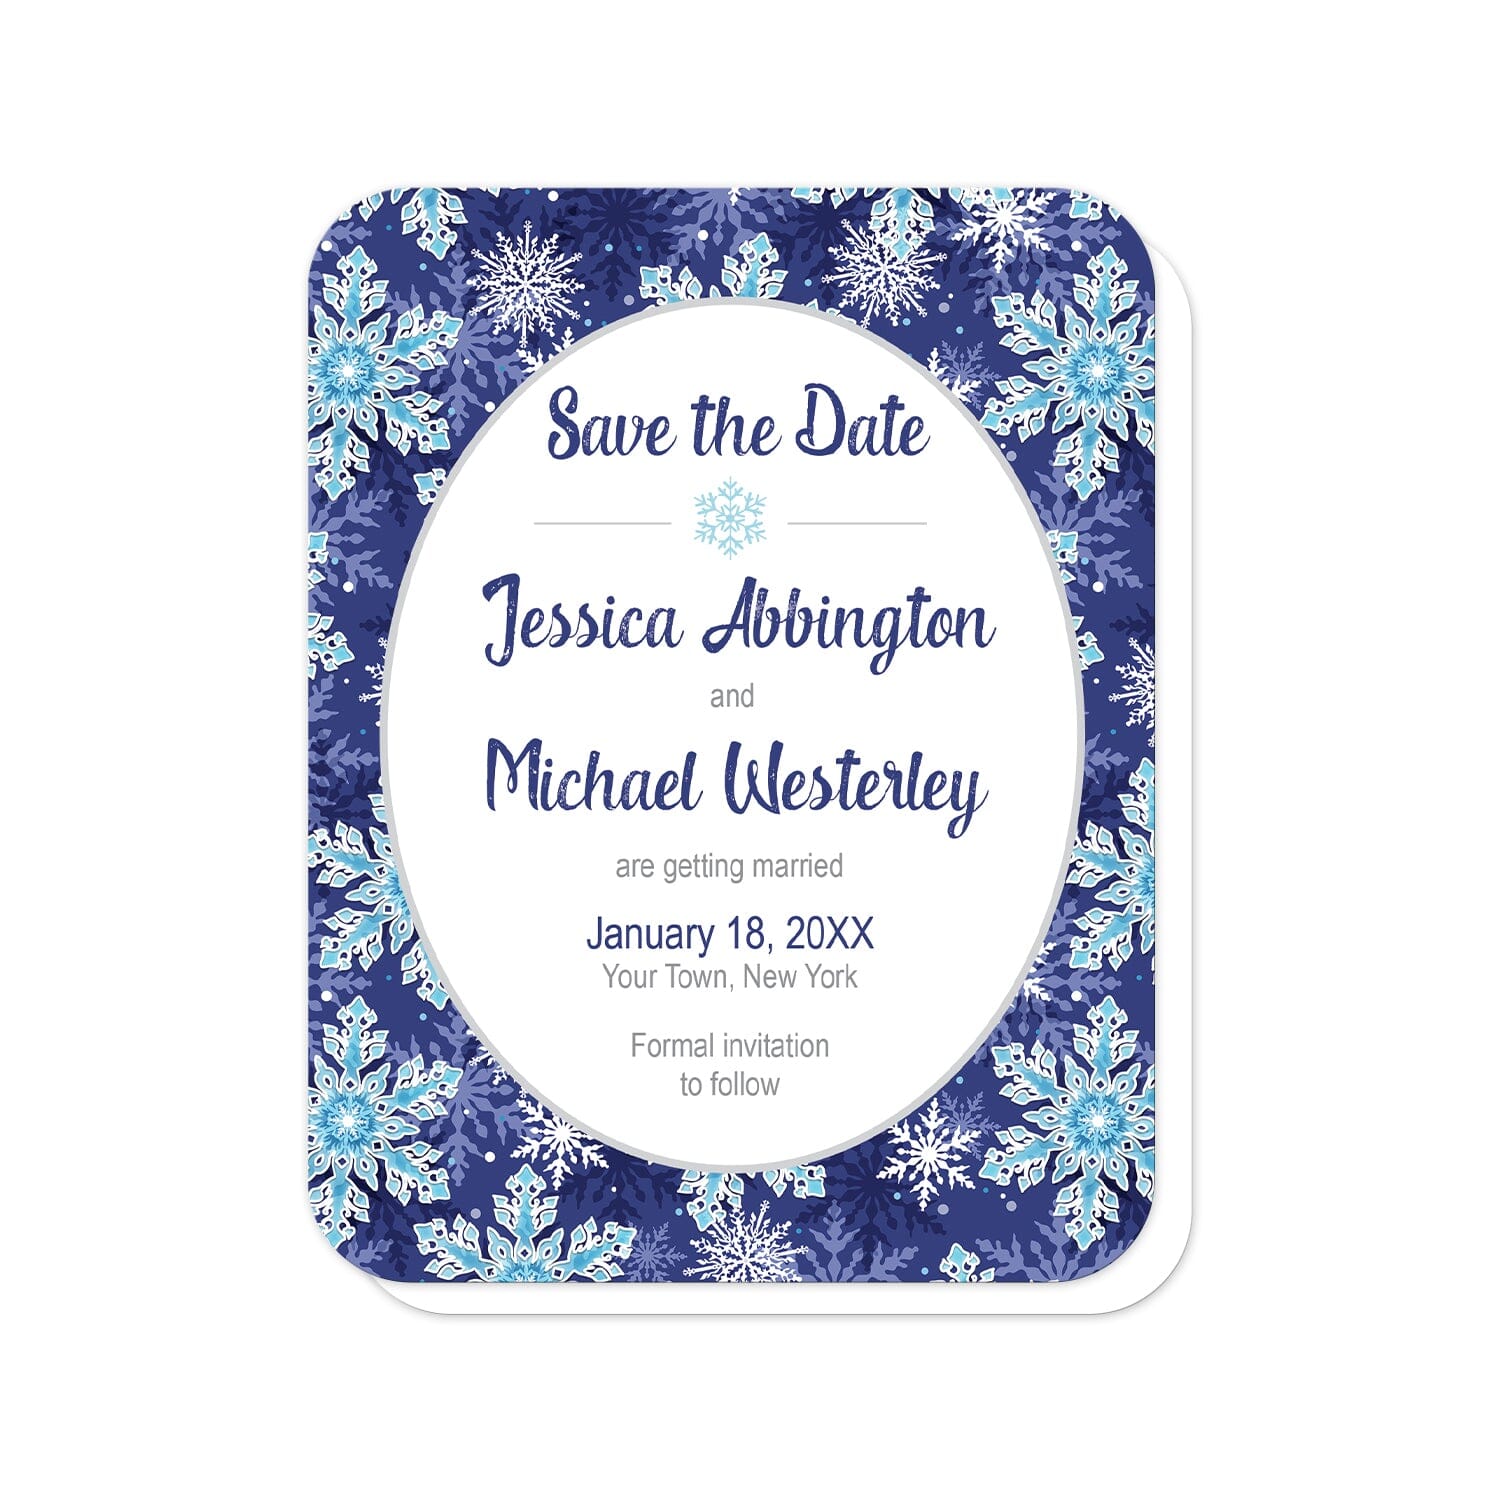 Navy Blue Snowflake Save the Date Cards (with rounded corners) at Artistically Invited. Beautifully ornate navy blue snowflake save the date cards designed with your personalized wedding date announcement details custom printed in navy blue and gray in a white oval frame design over a navy blue, aqua, and white snowflake pattern background.